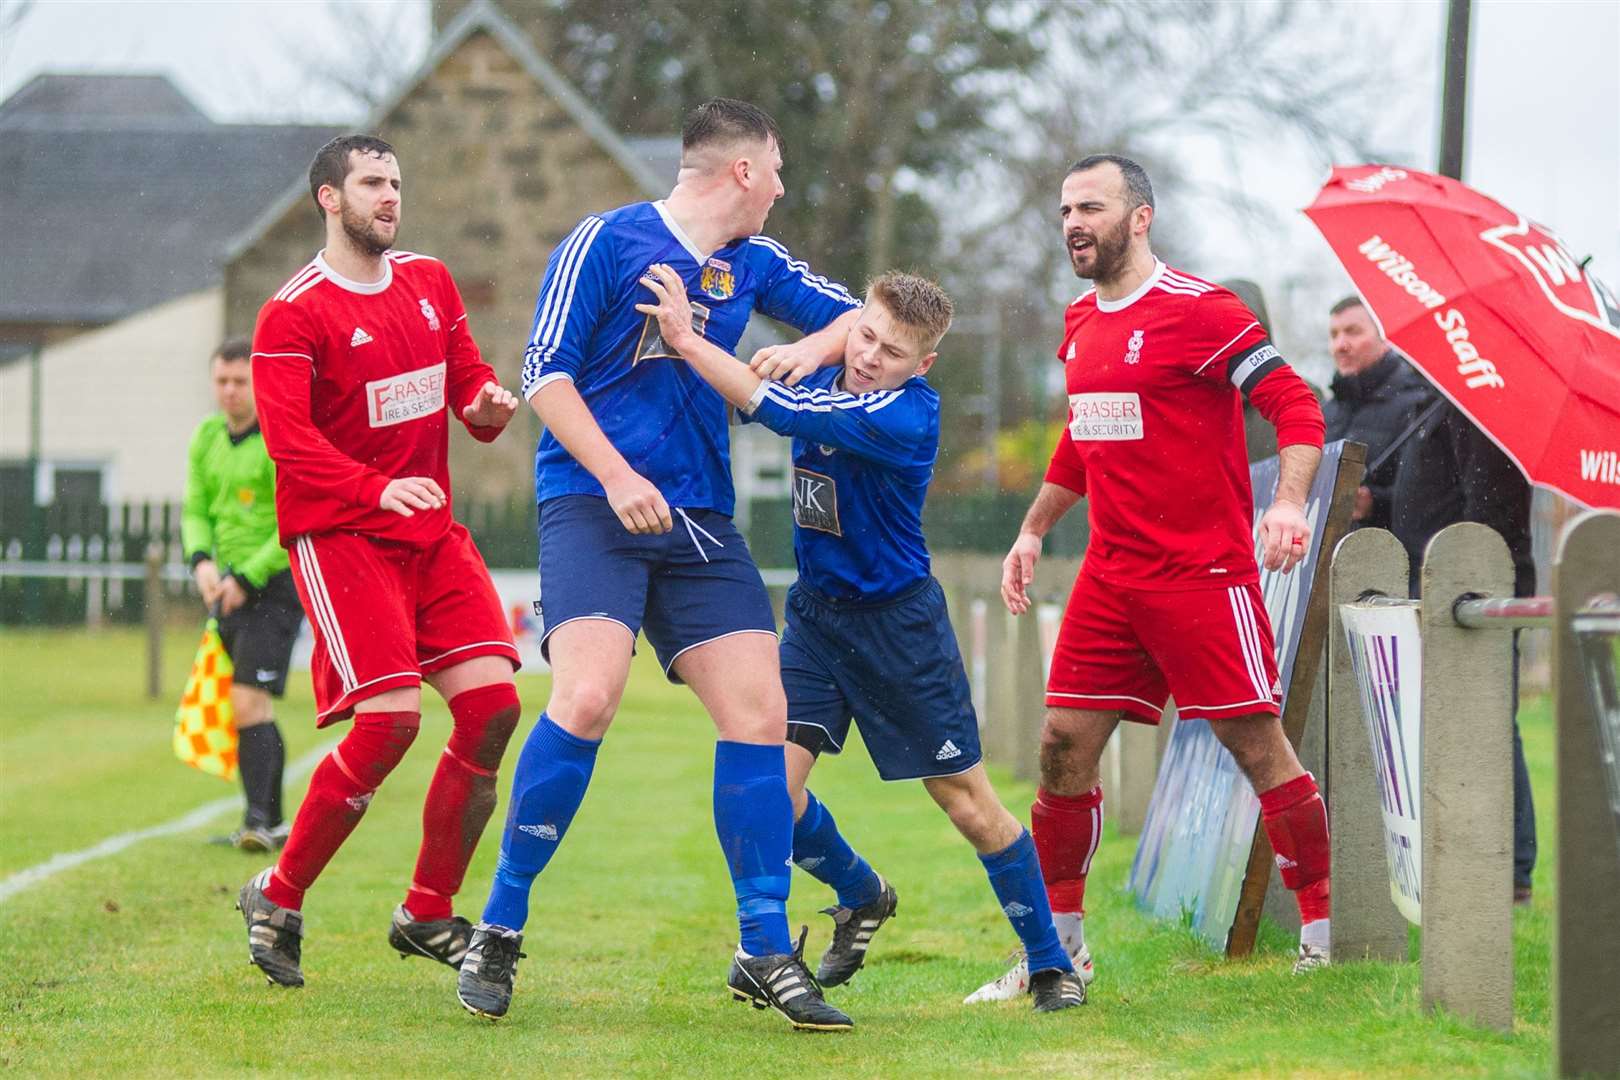 This tussle between Burghead's Lewis McAndrew and Forres' Matthew Davidson resulted in the pair getting sent off in the first half. Picture: Daniel Forsyth